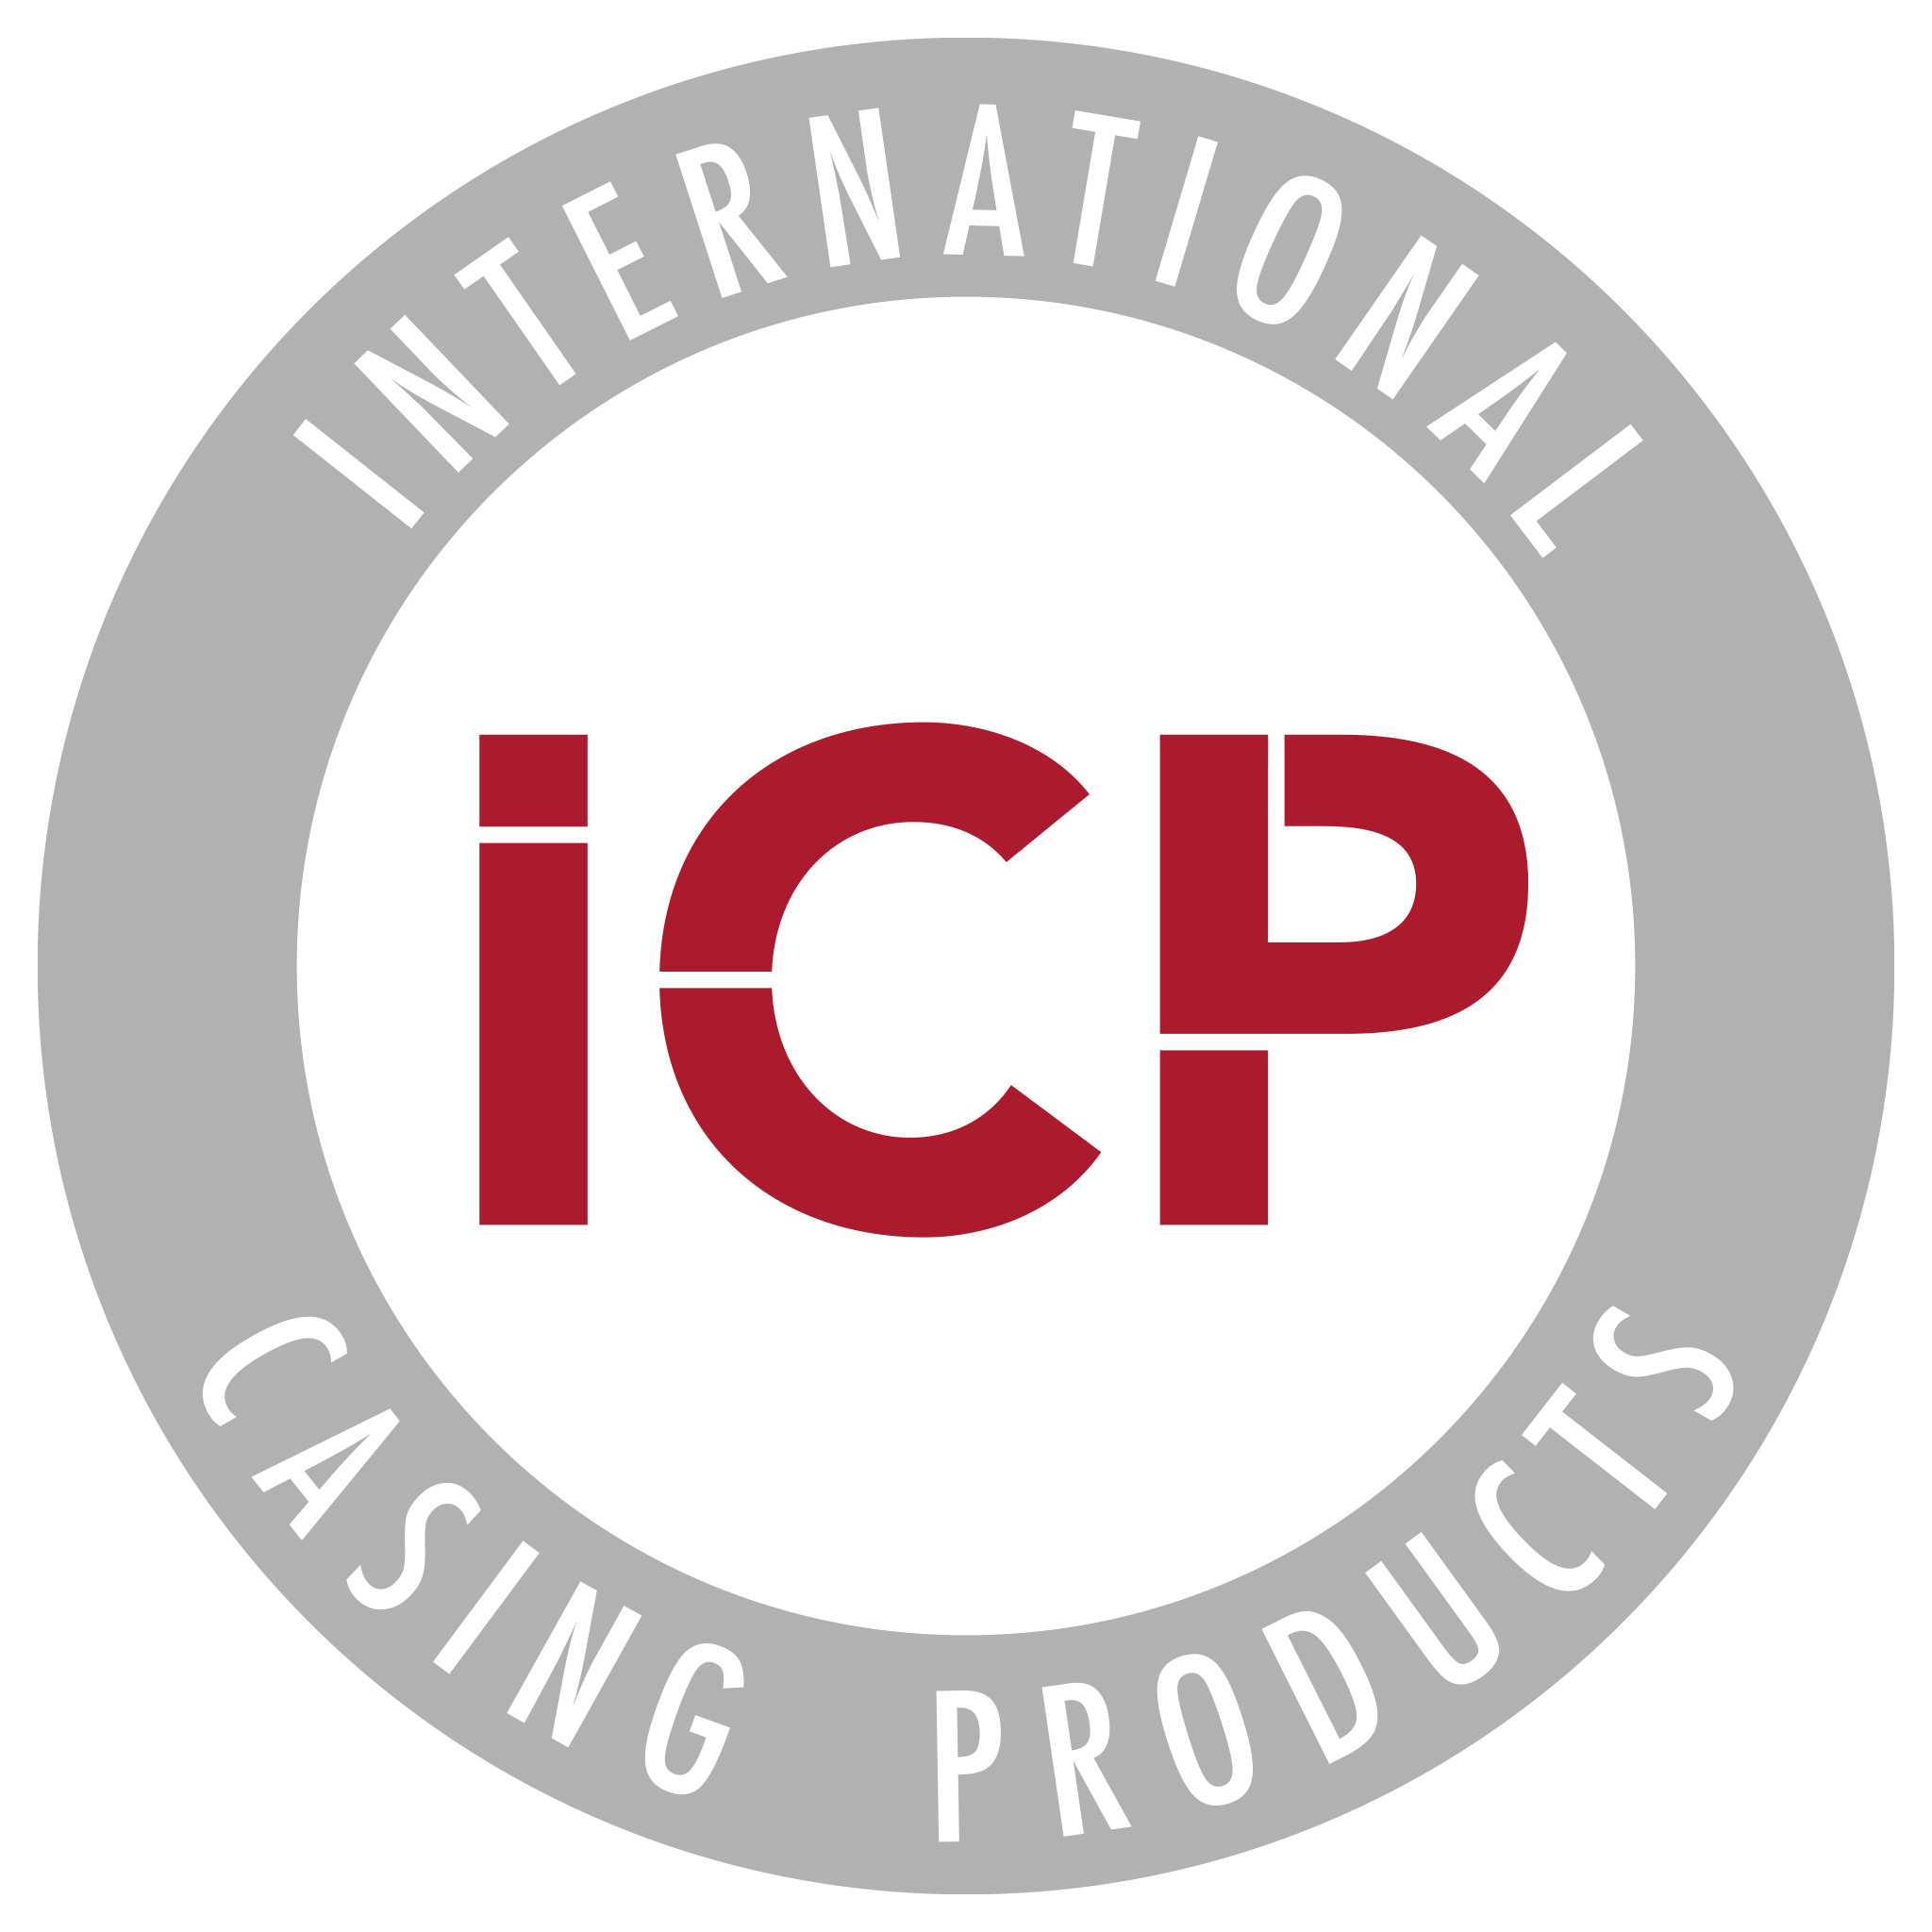 ICP - INTERNATIONAL CASING PRODUCTS